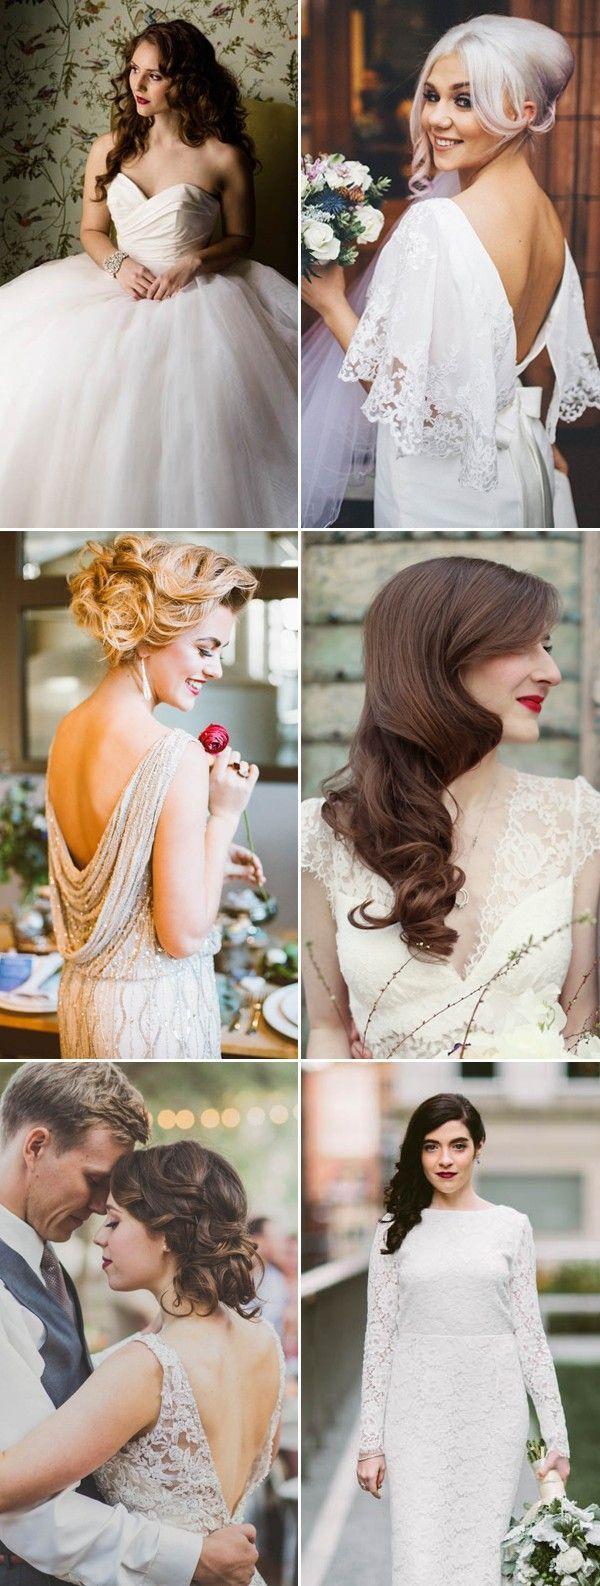 Hochzeit - How To Nail Your Vintage Bridal Style